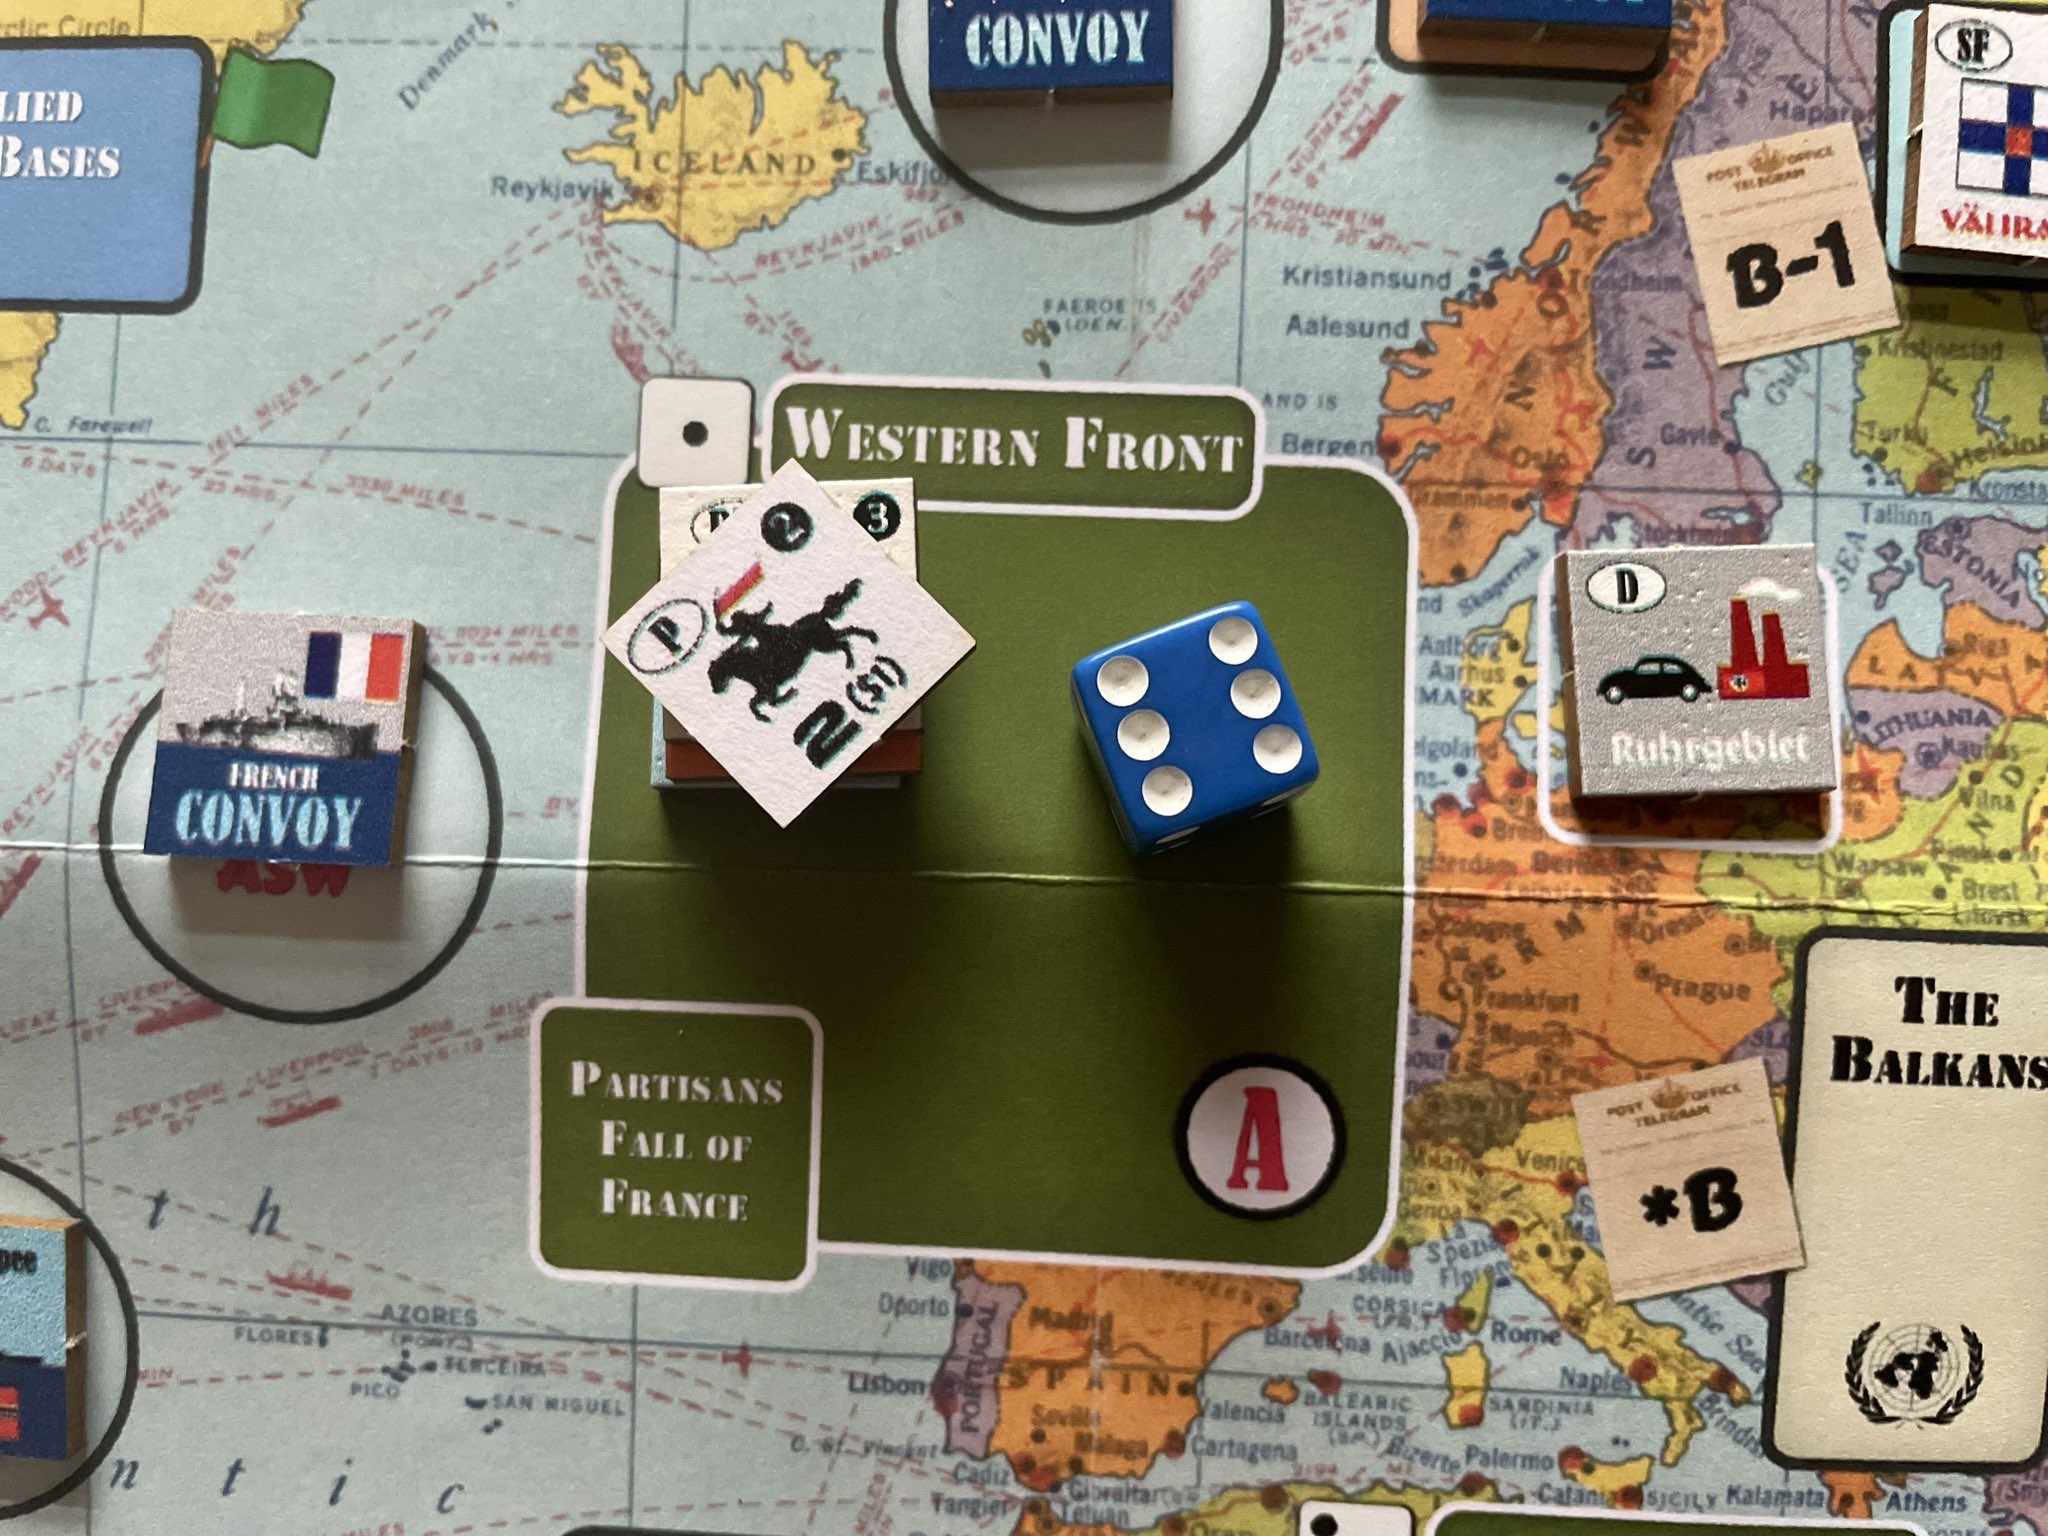 Review: Winter Thunder: The Battle of the Bulge from Tiny Battle Publishing  – The Players' Aid